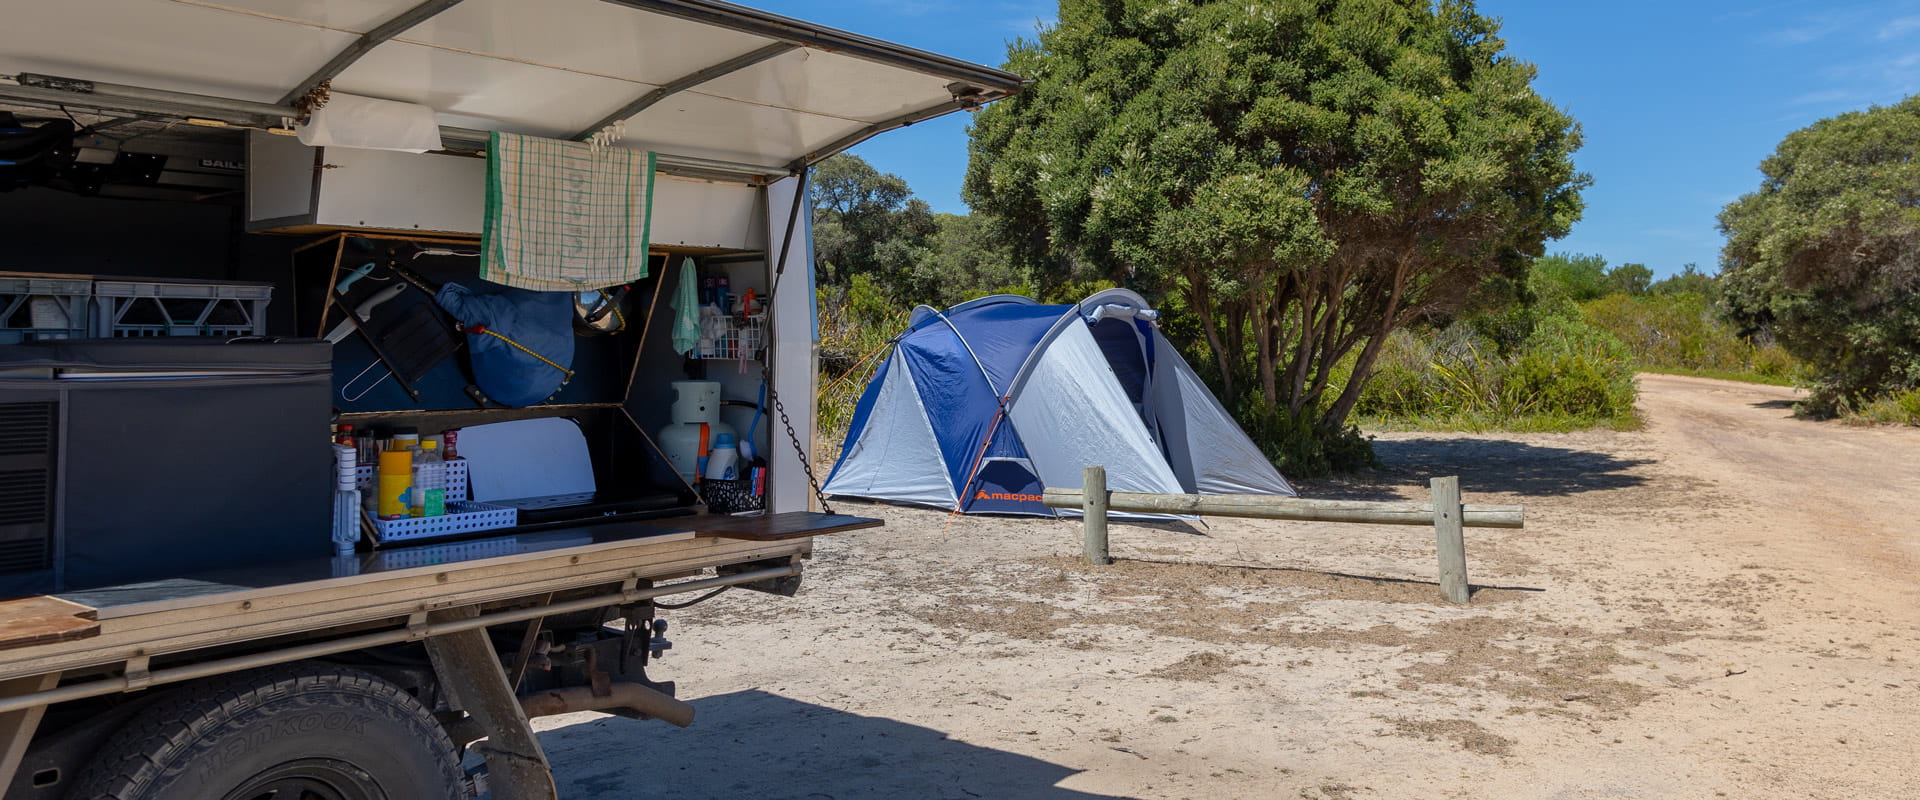 A camping trailer sits open in front of a tent pitched under a tree in a beachside campground.